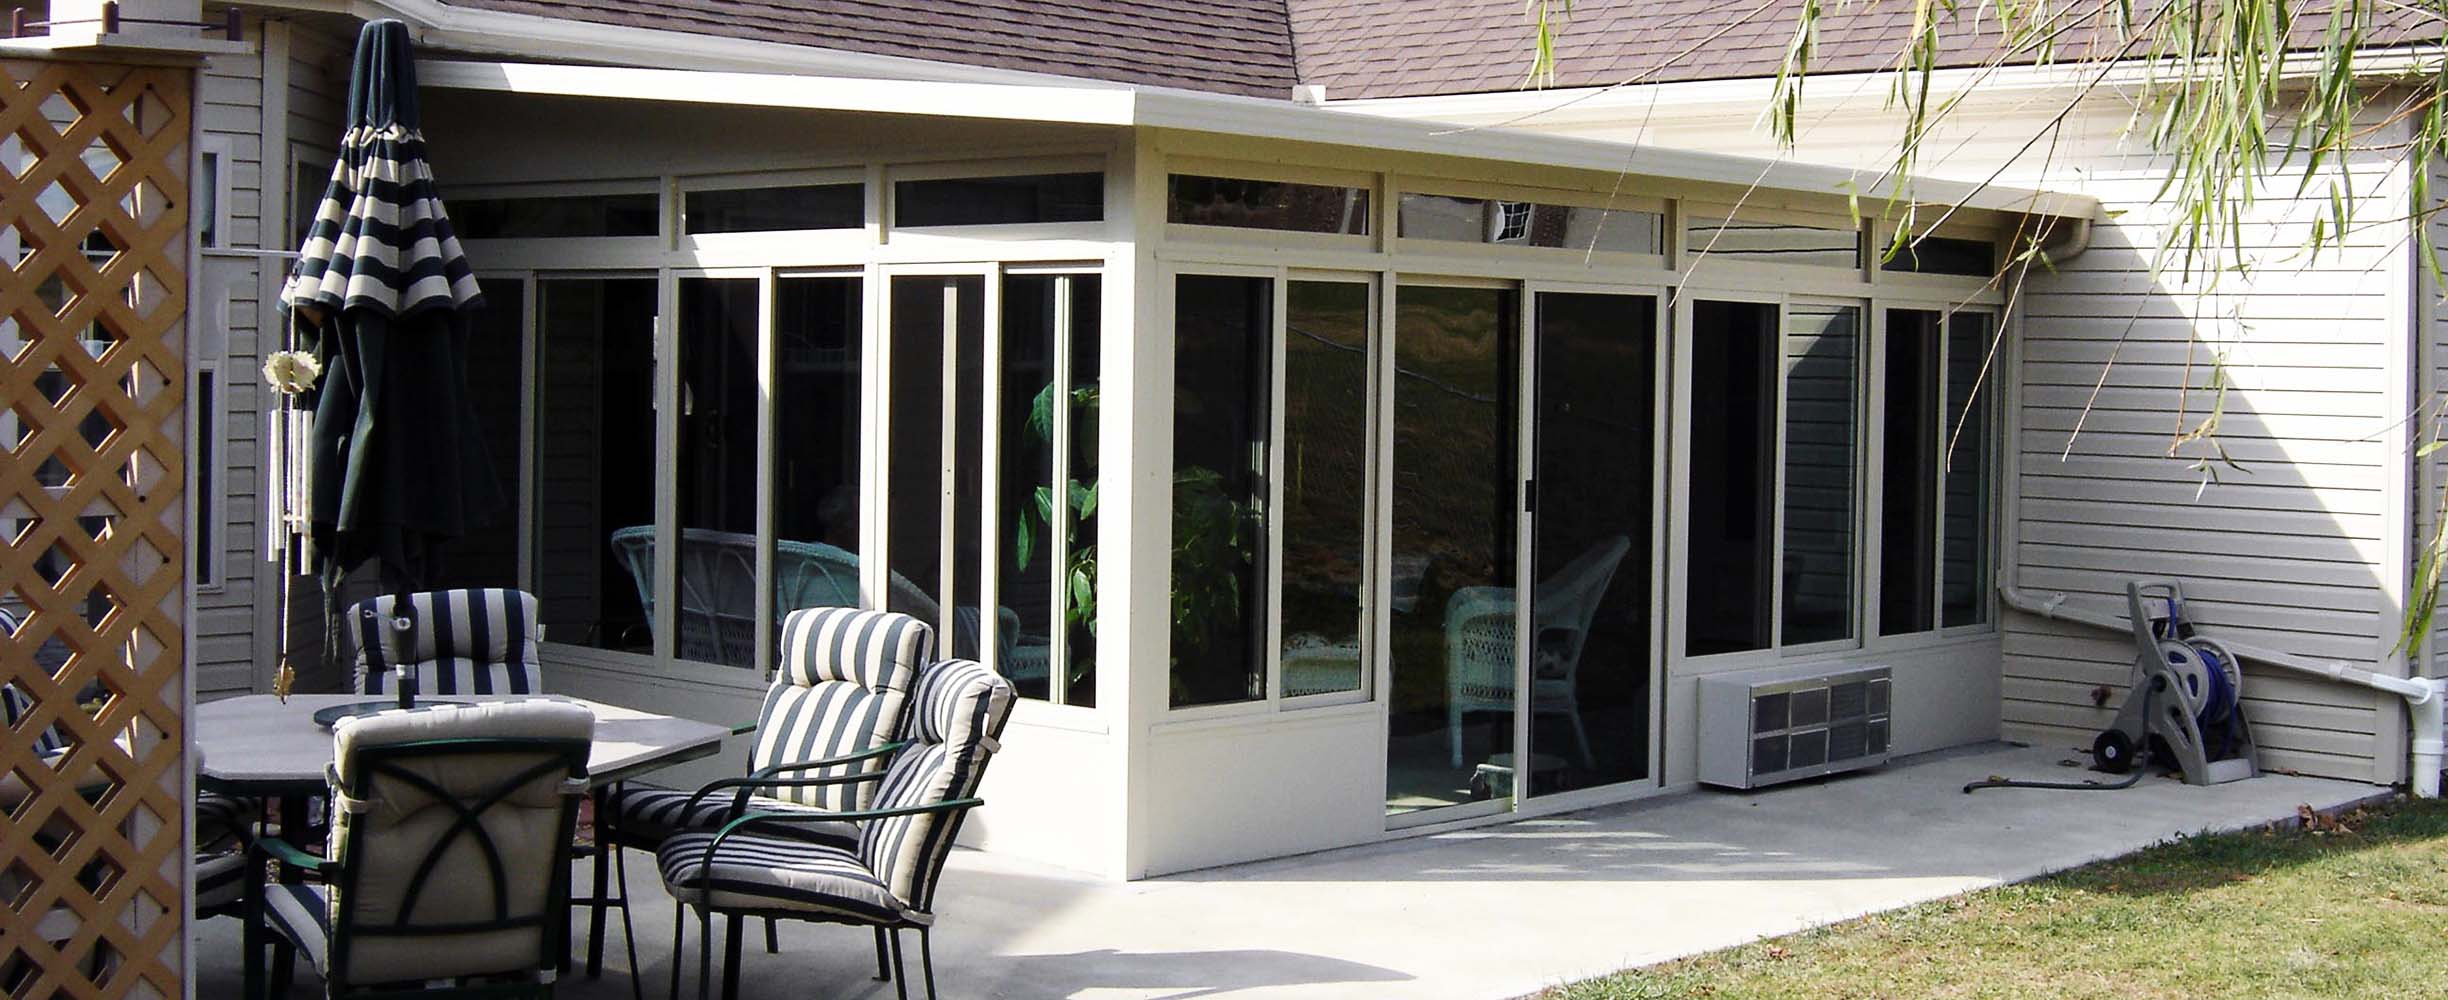 Sunroom designed and implemented for all seasons effectively expanding the house in a practical and cofortable way!